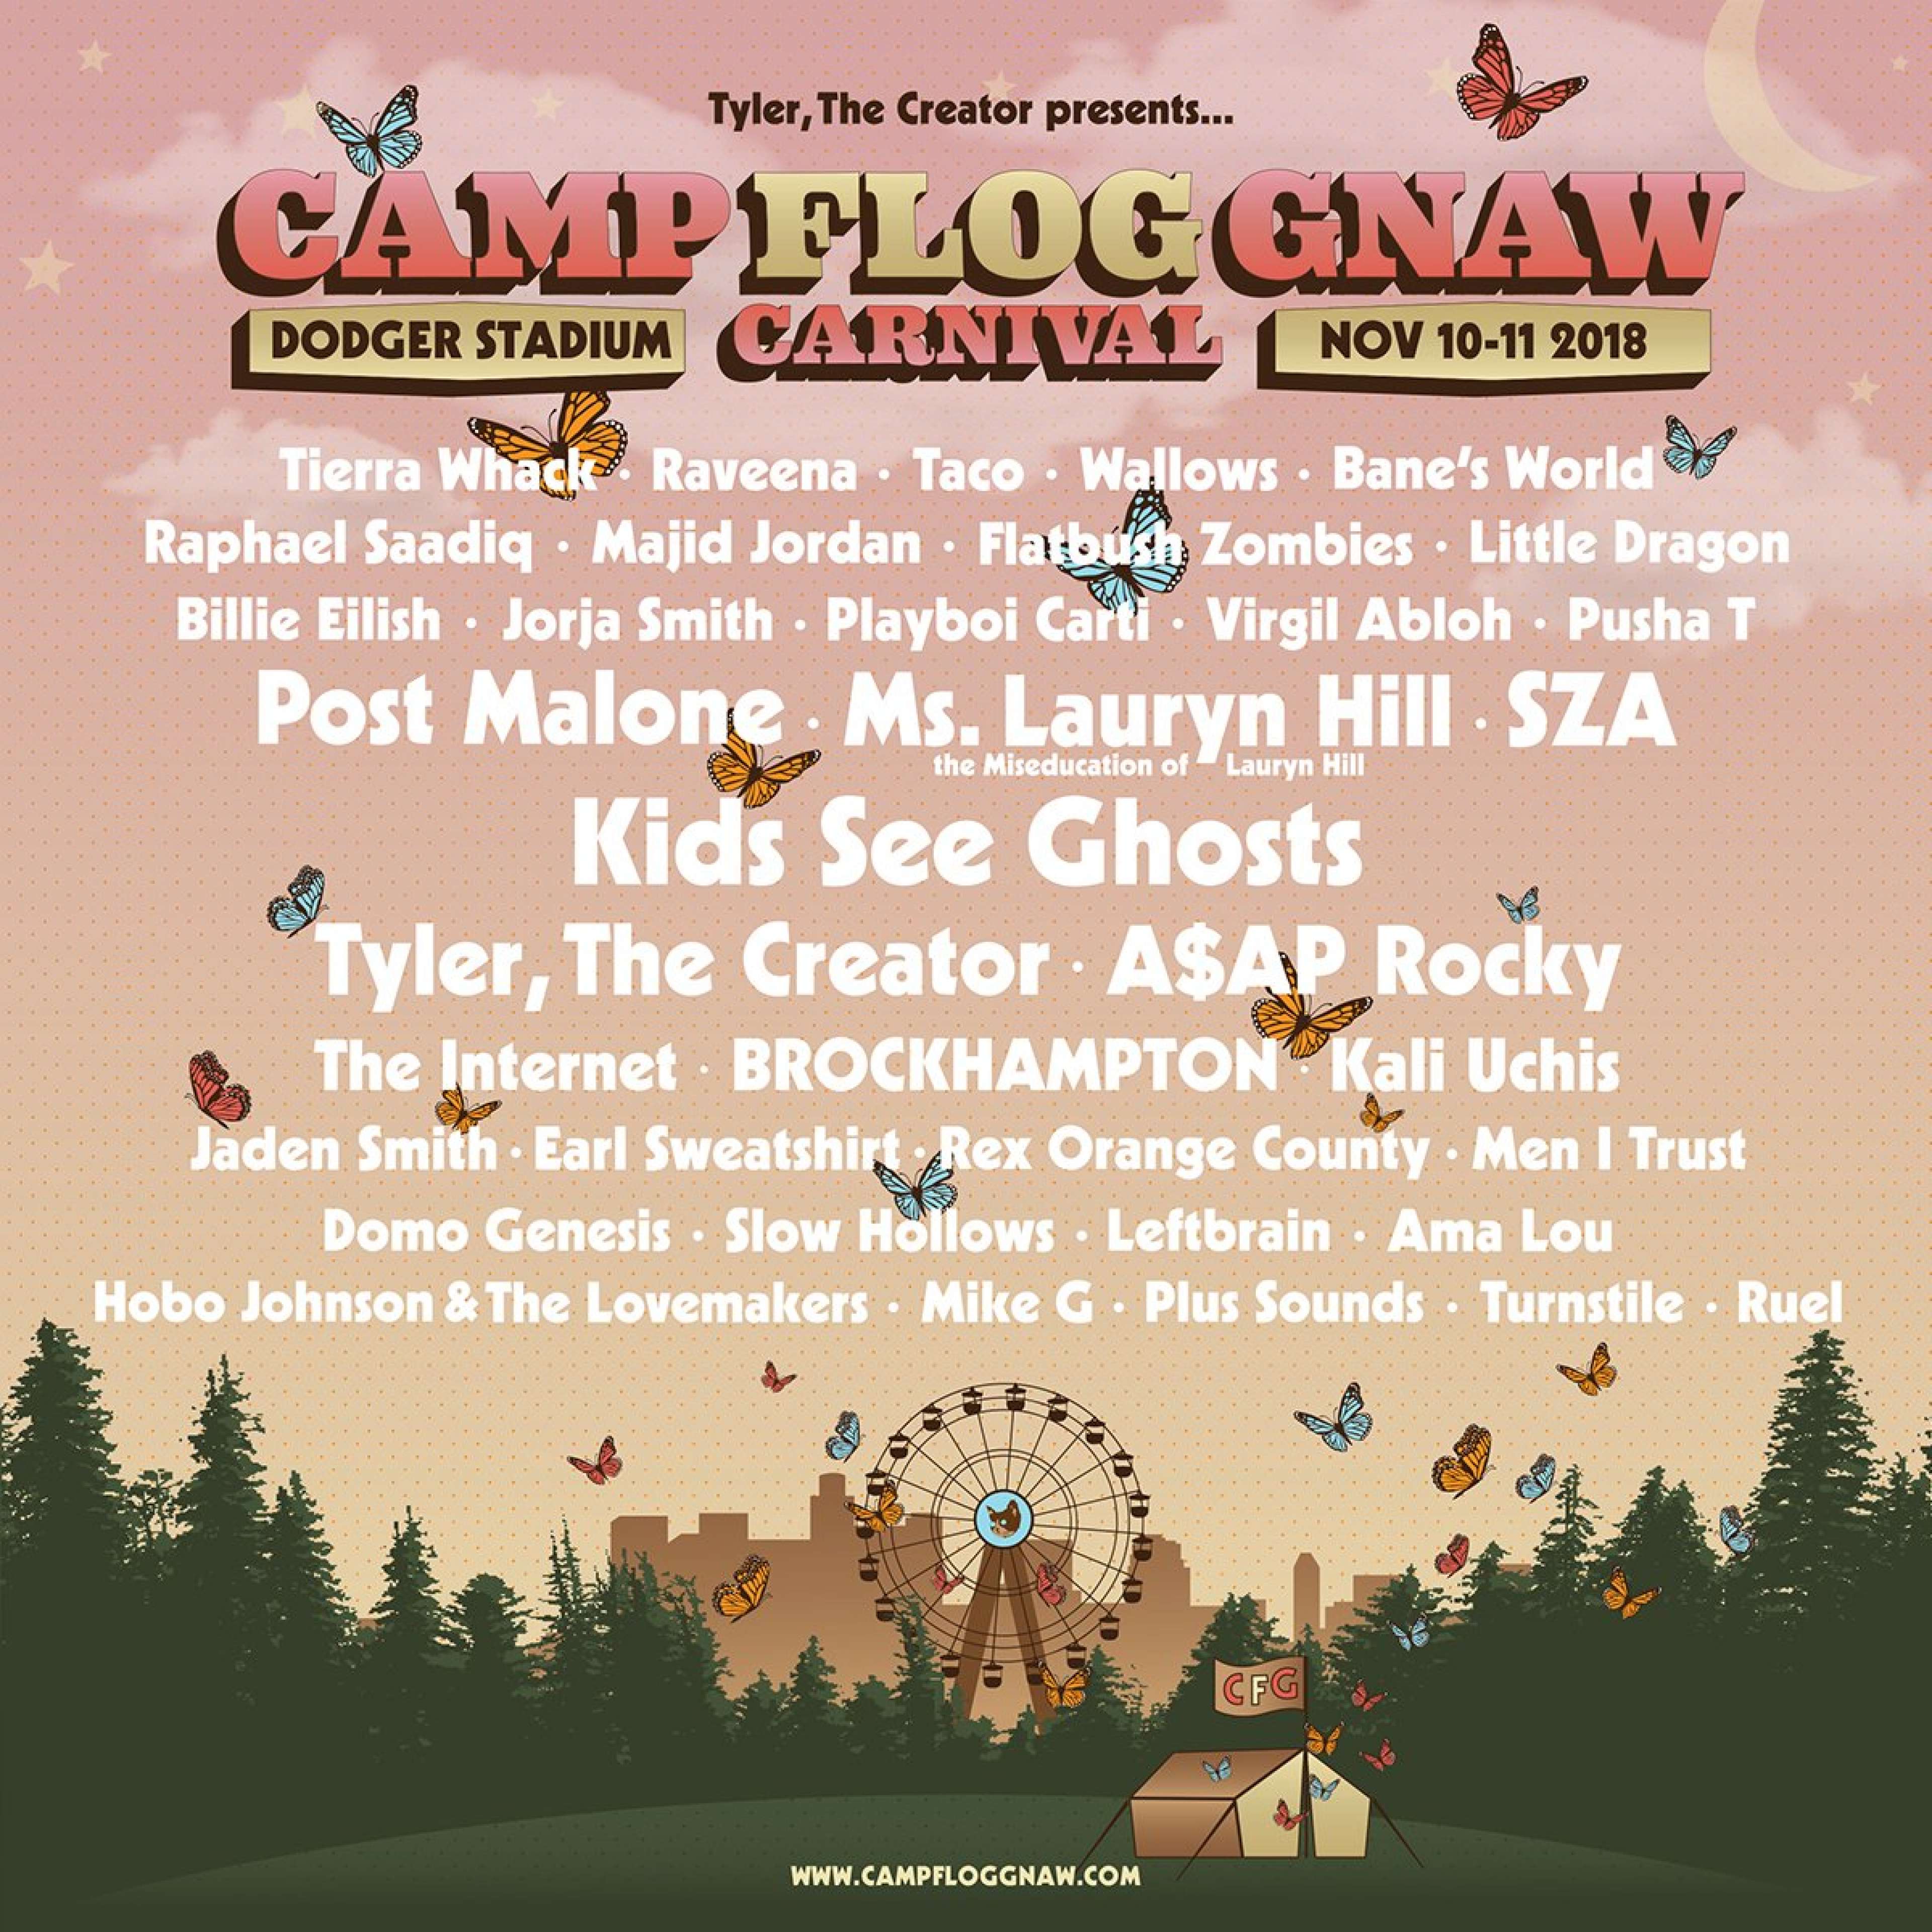 Ruel invited to play Tyler The Creatorâ€™s Camp Flog Gnaw.